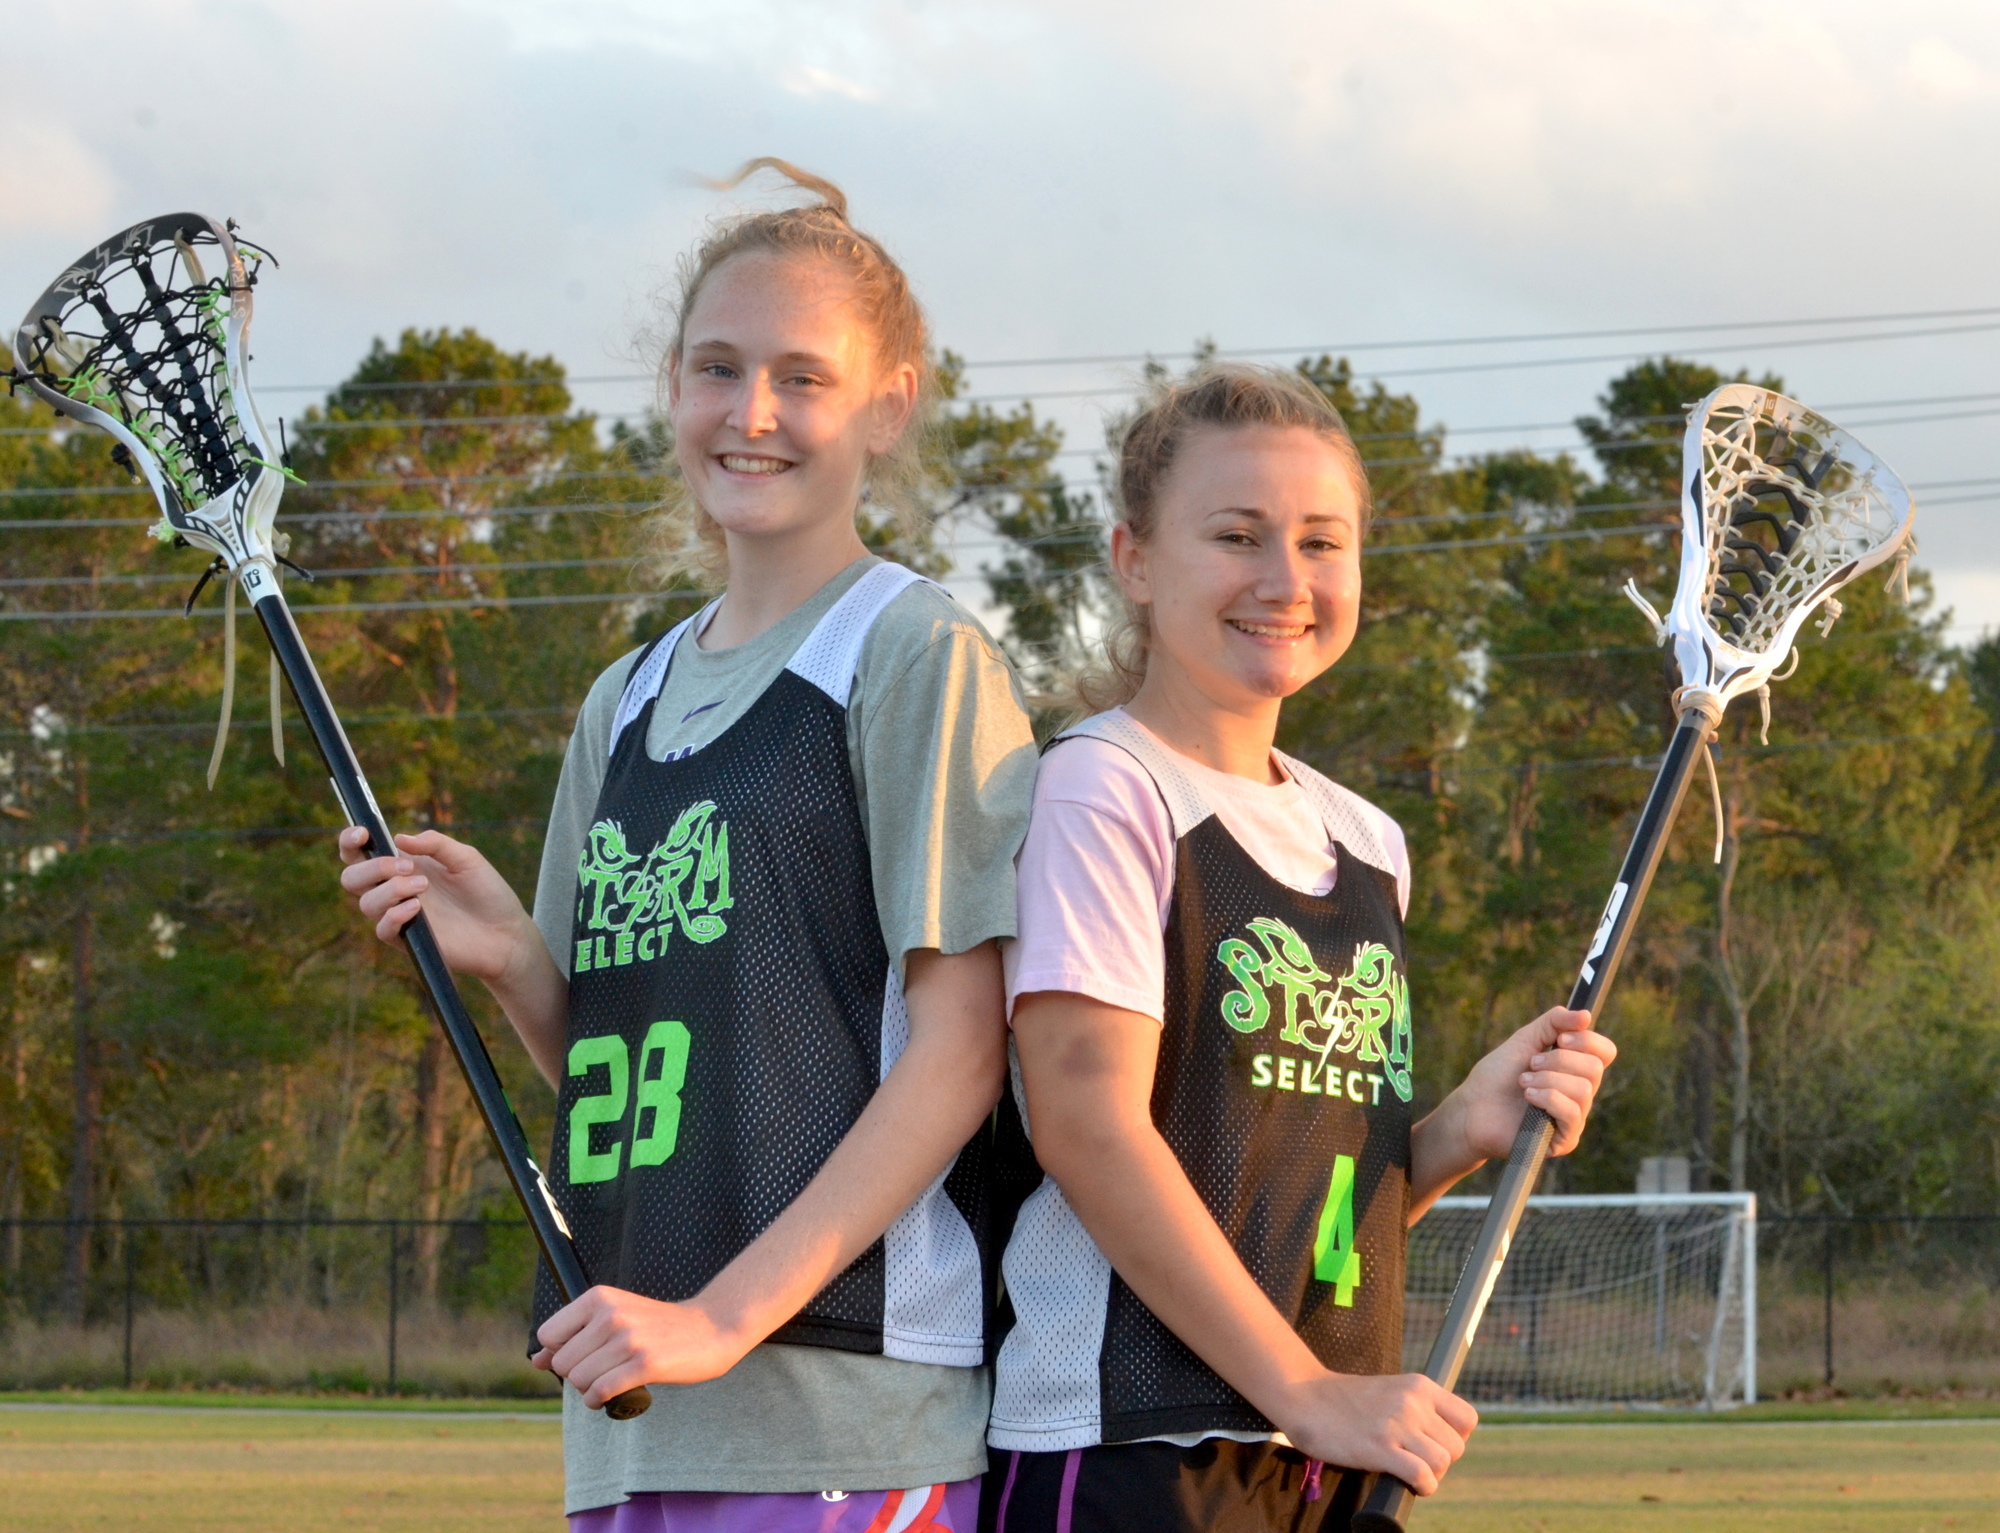 Elyse Decker, left, and Piper Johnson are teammates for Dr. Phillips and the Storm Select travel team.